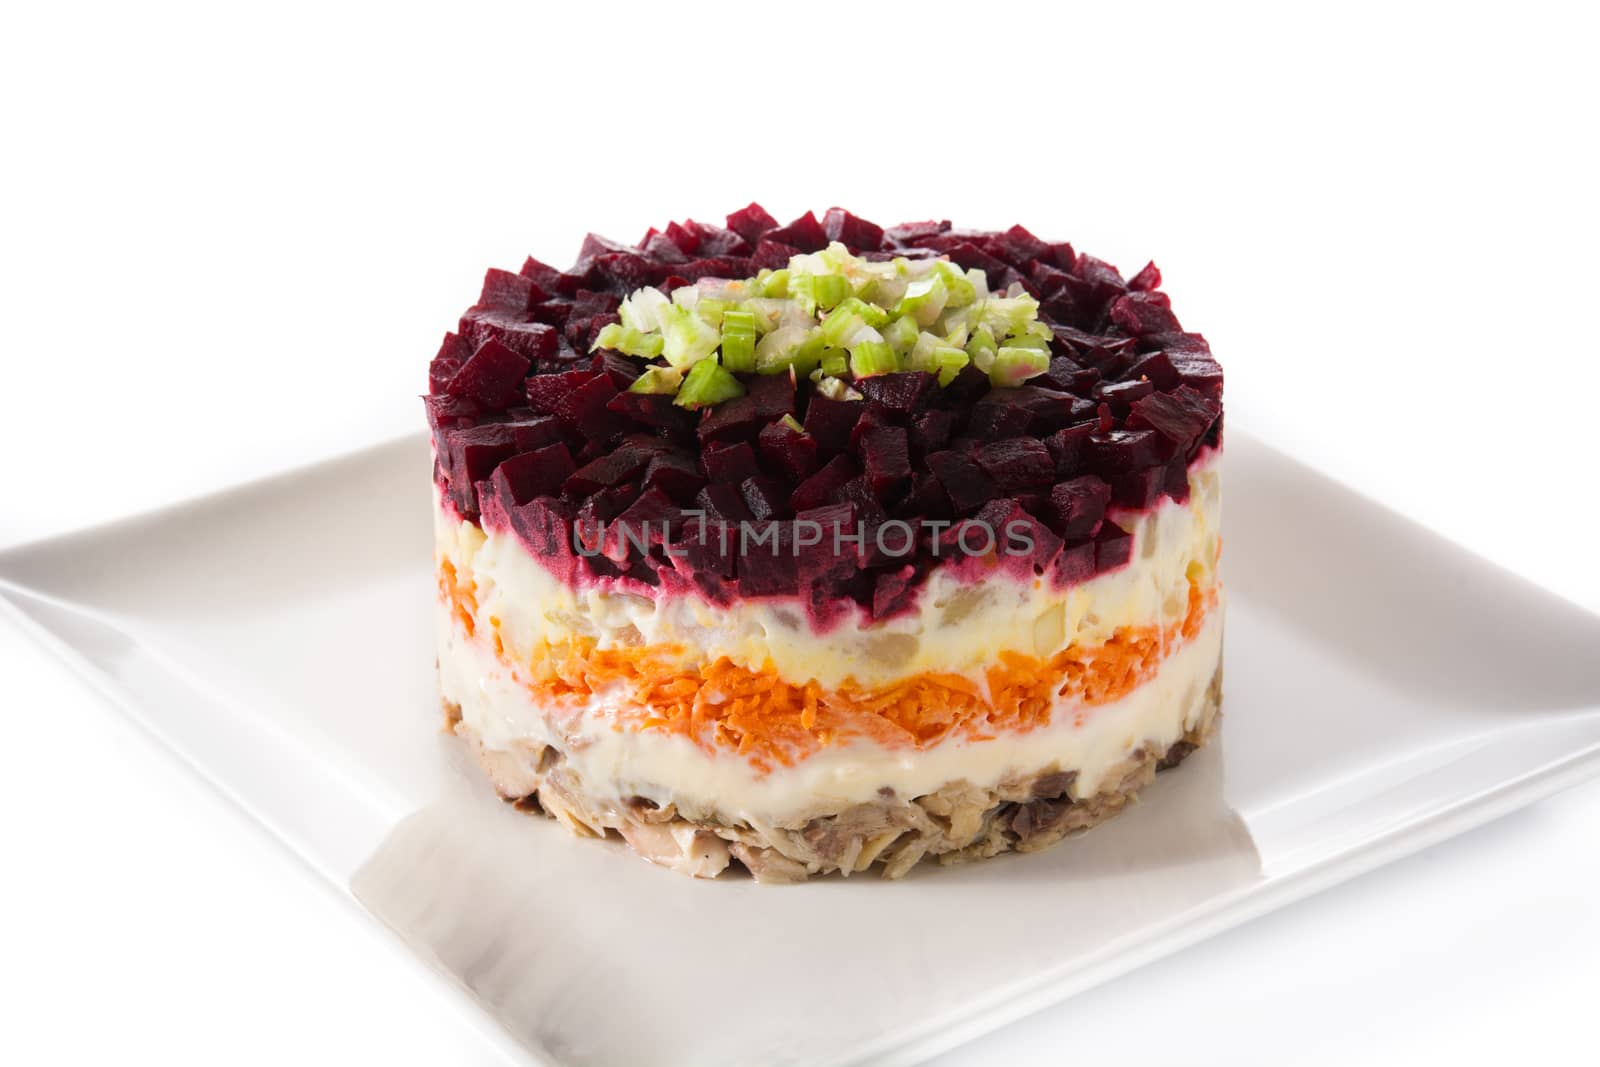 Traditional Russian herring salad by chandlervid85